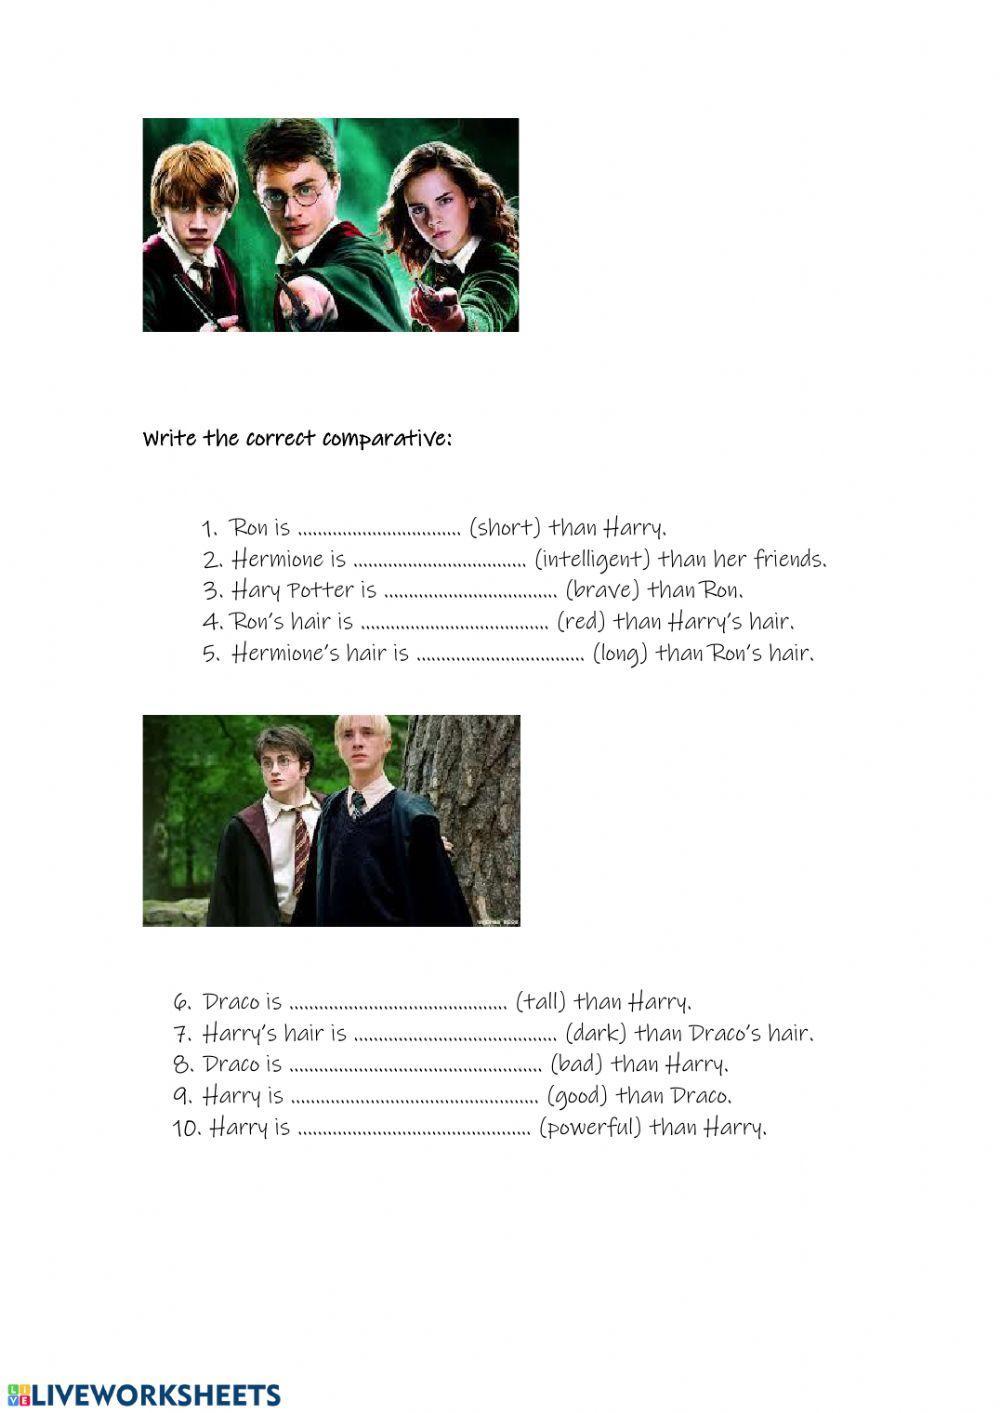 Harry Potter and comparatives